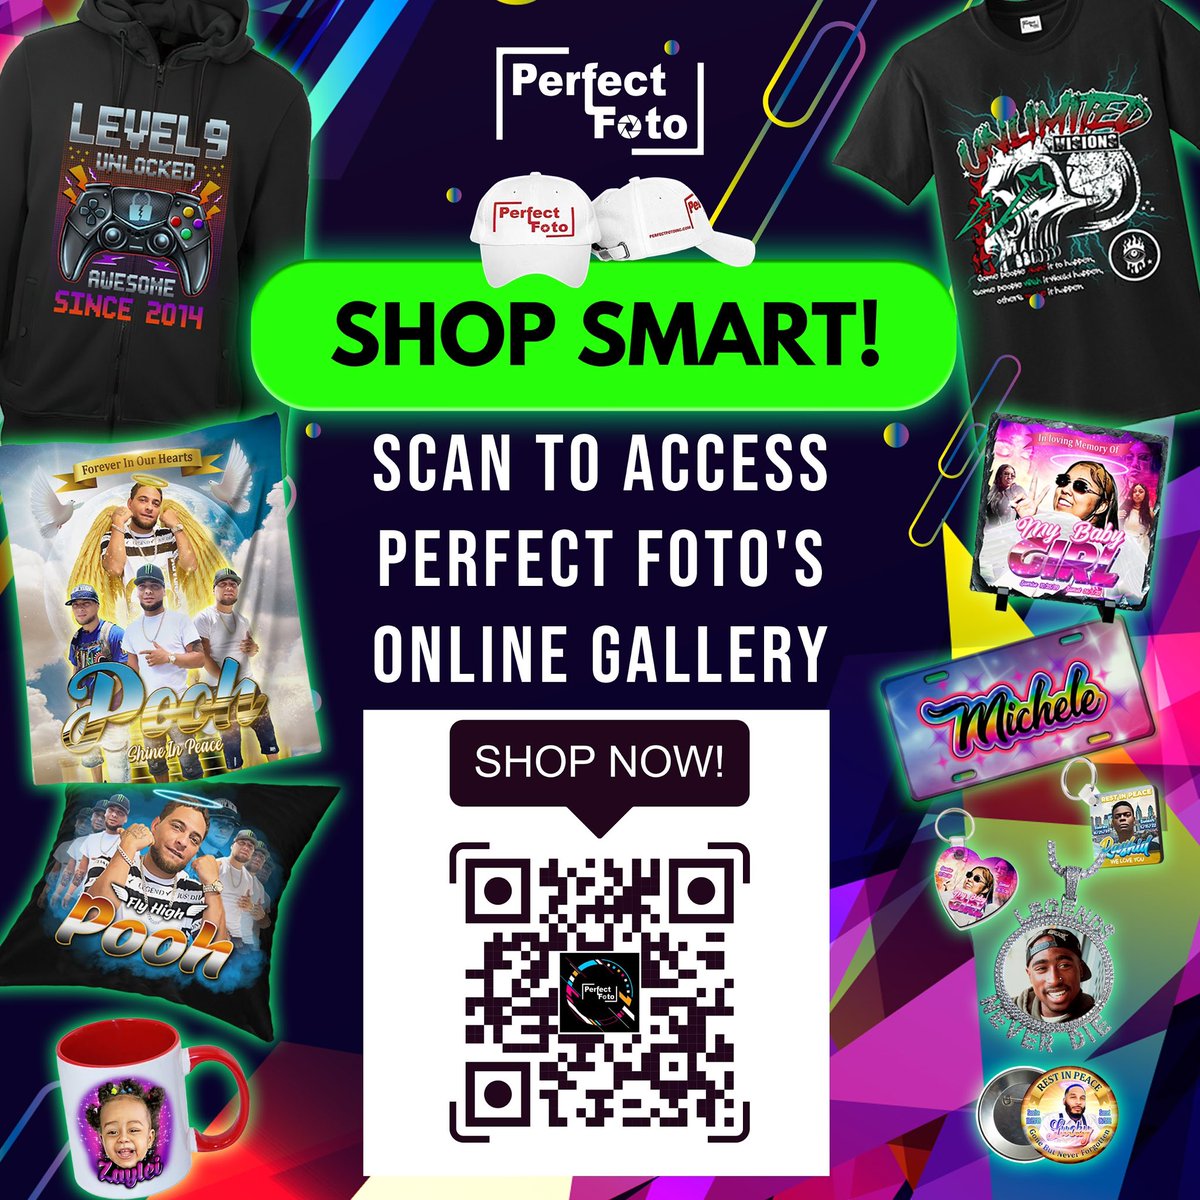 Simply SCAN the QR code and step into Perfect Foto's vibrant Online Gallery. Dive into designs that define you.📸

#perfectfoto #customprints #expressyourself #uniquestyle #personalizedgifts #trendyteestime #cooldesigns